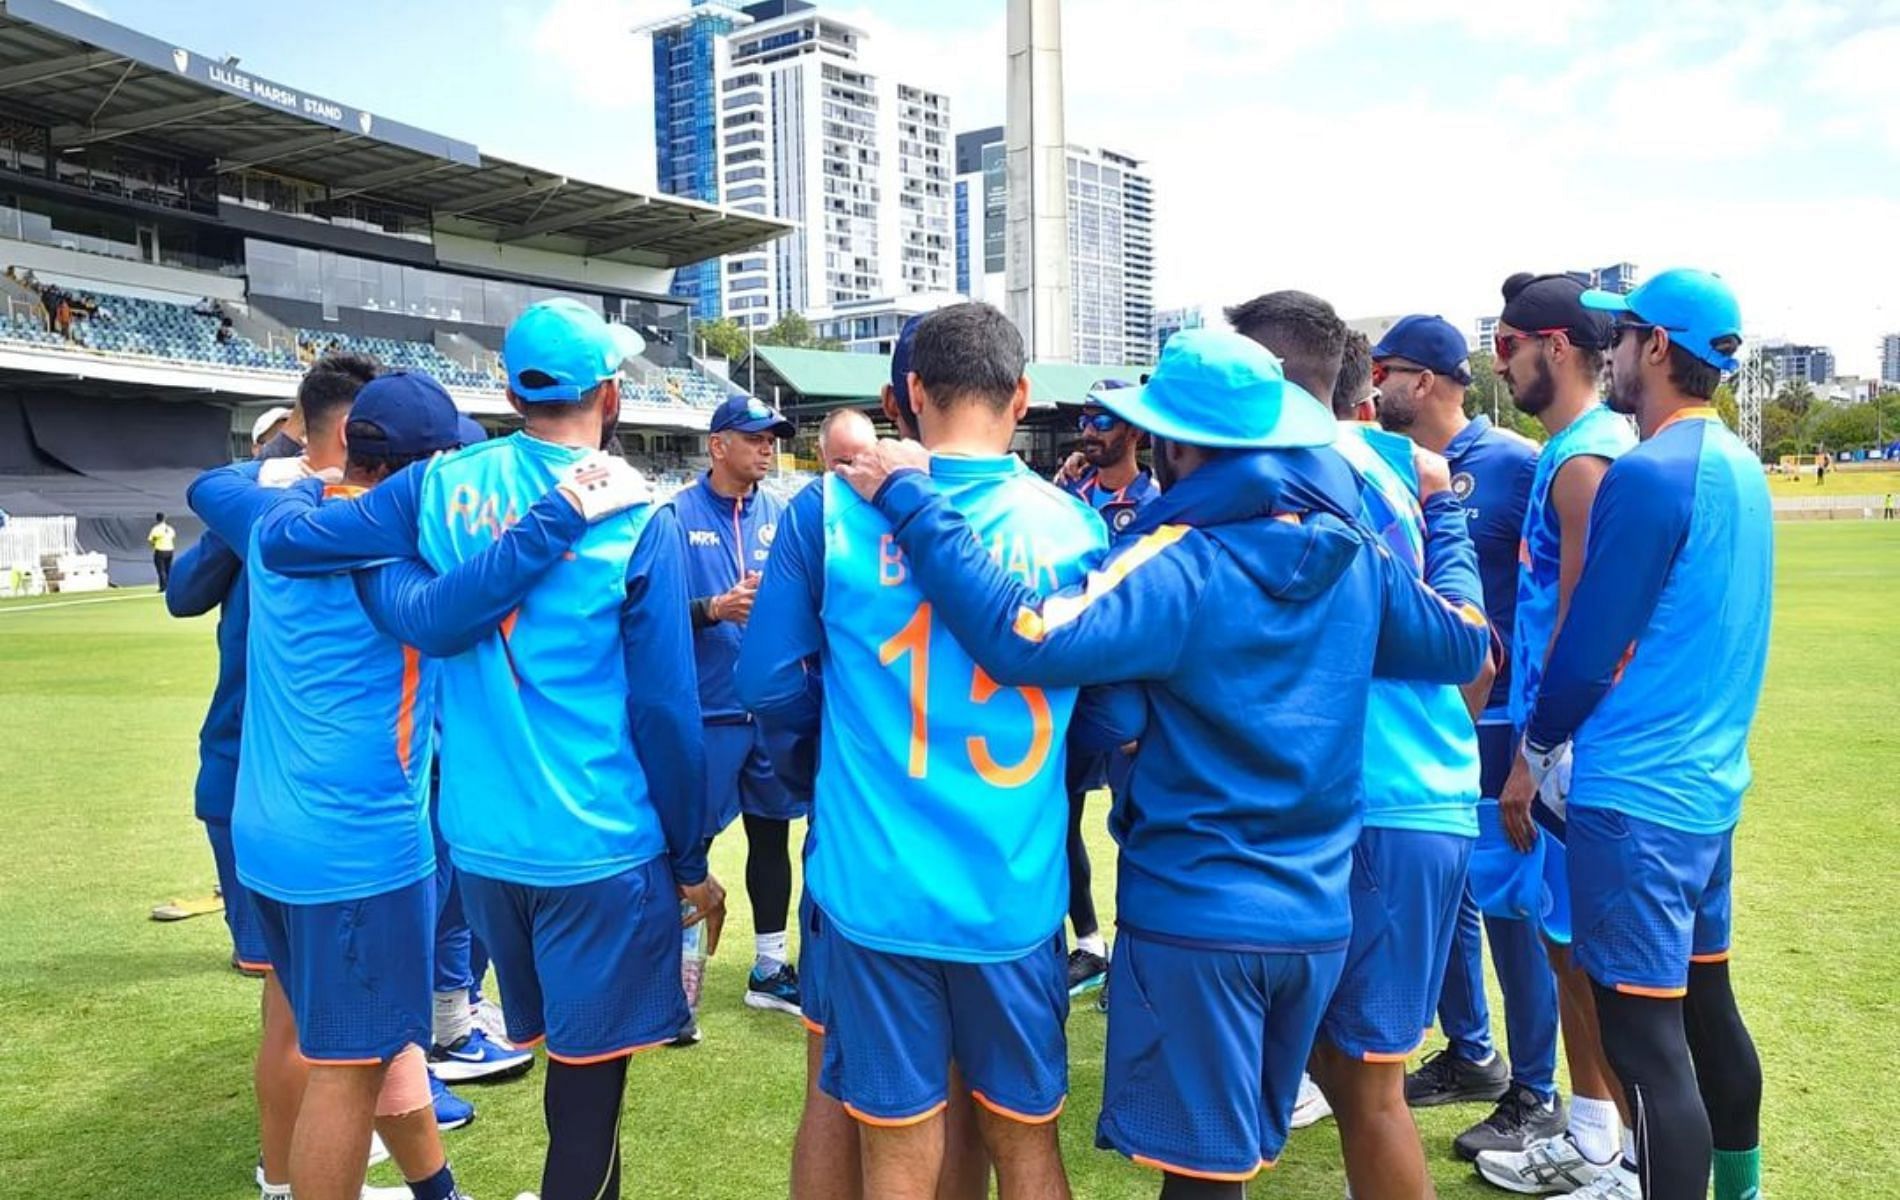 Indian cricket team at a practice session. (Pic: Instagram)